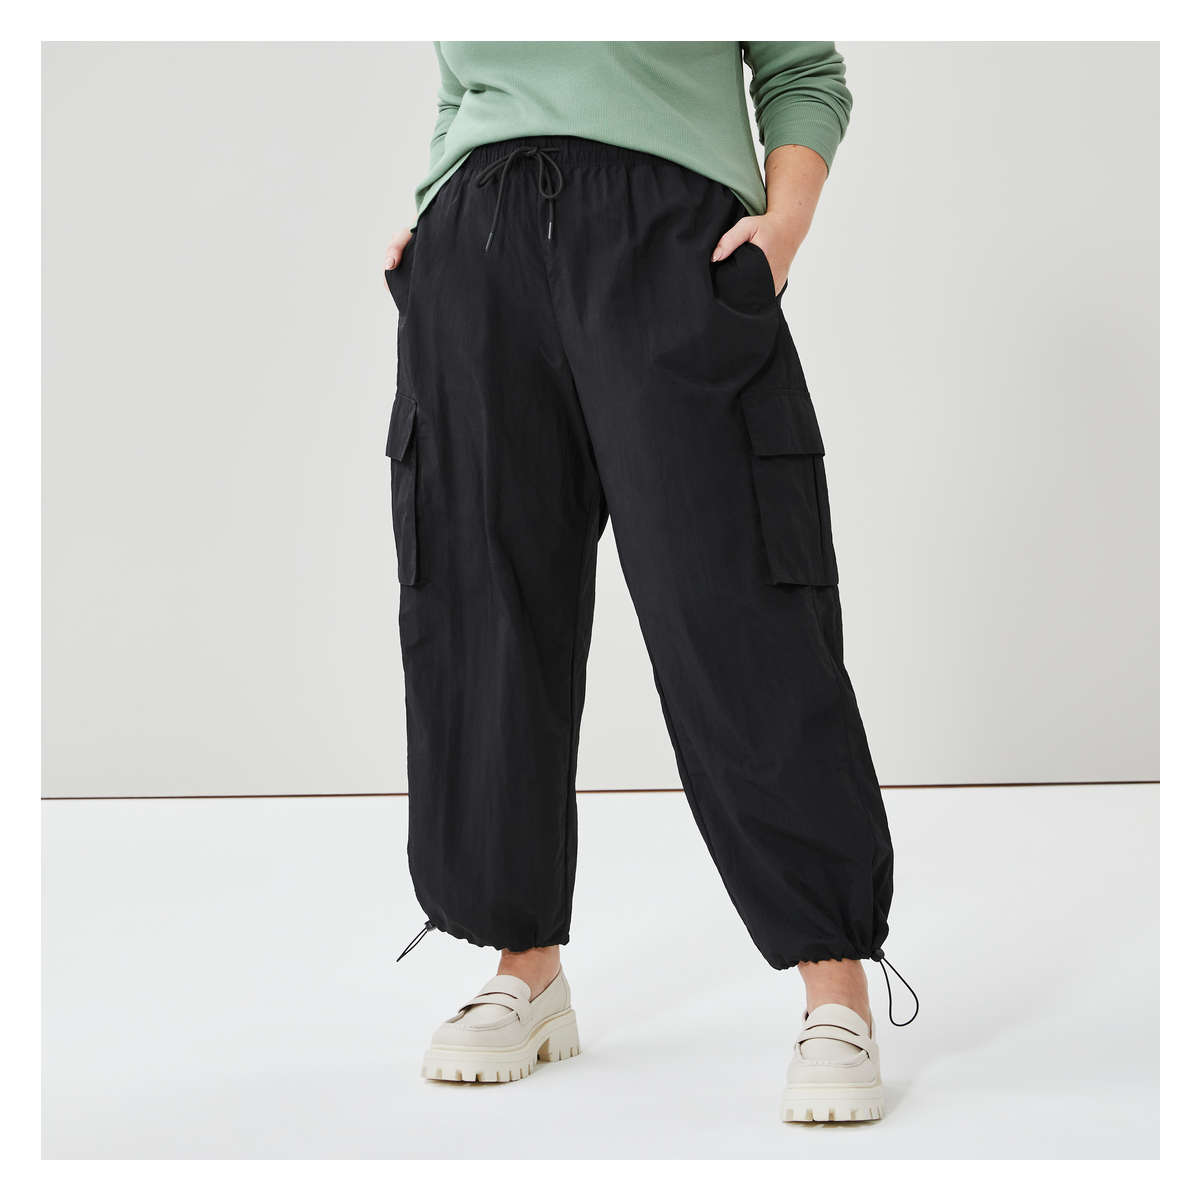 Clearance RYRJJ Women's Cotton Cargo Jogger Sweatpants with Multi